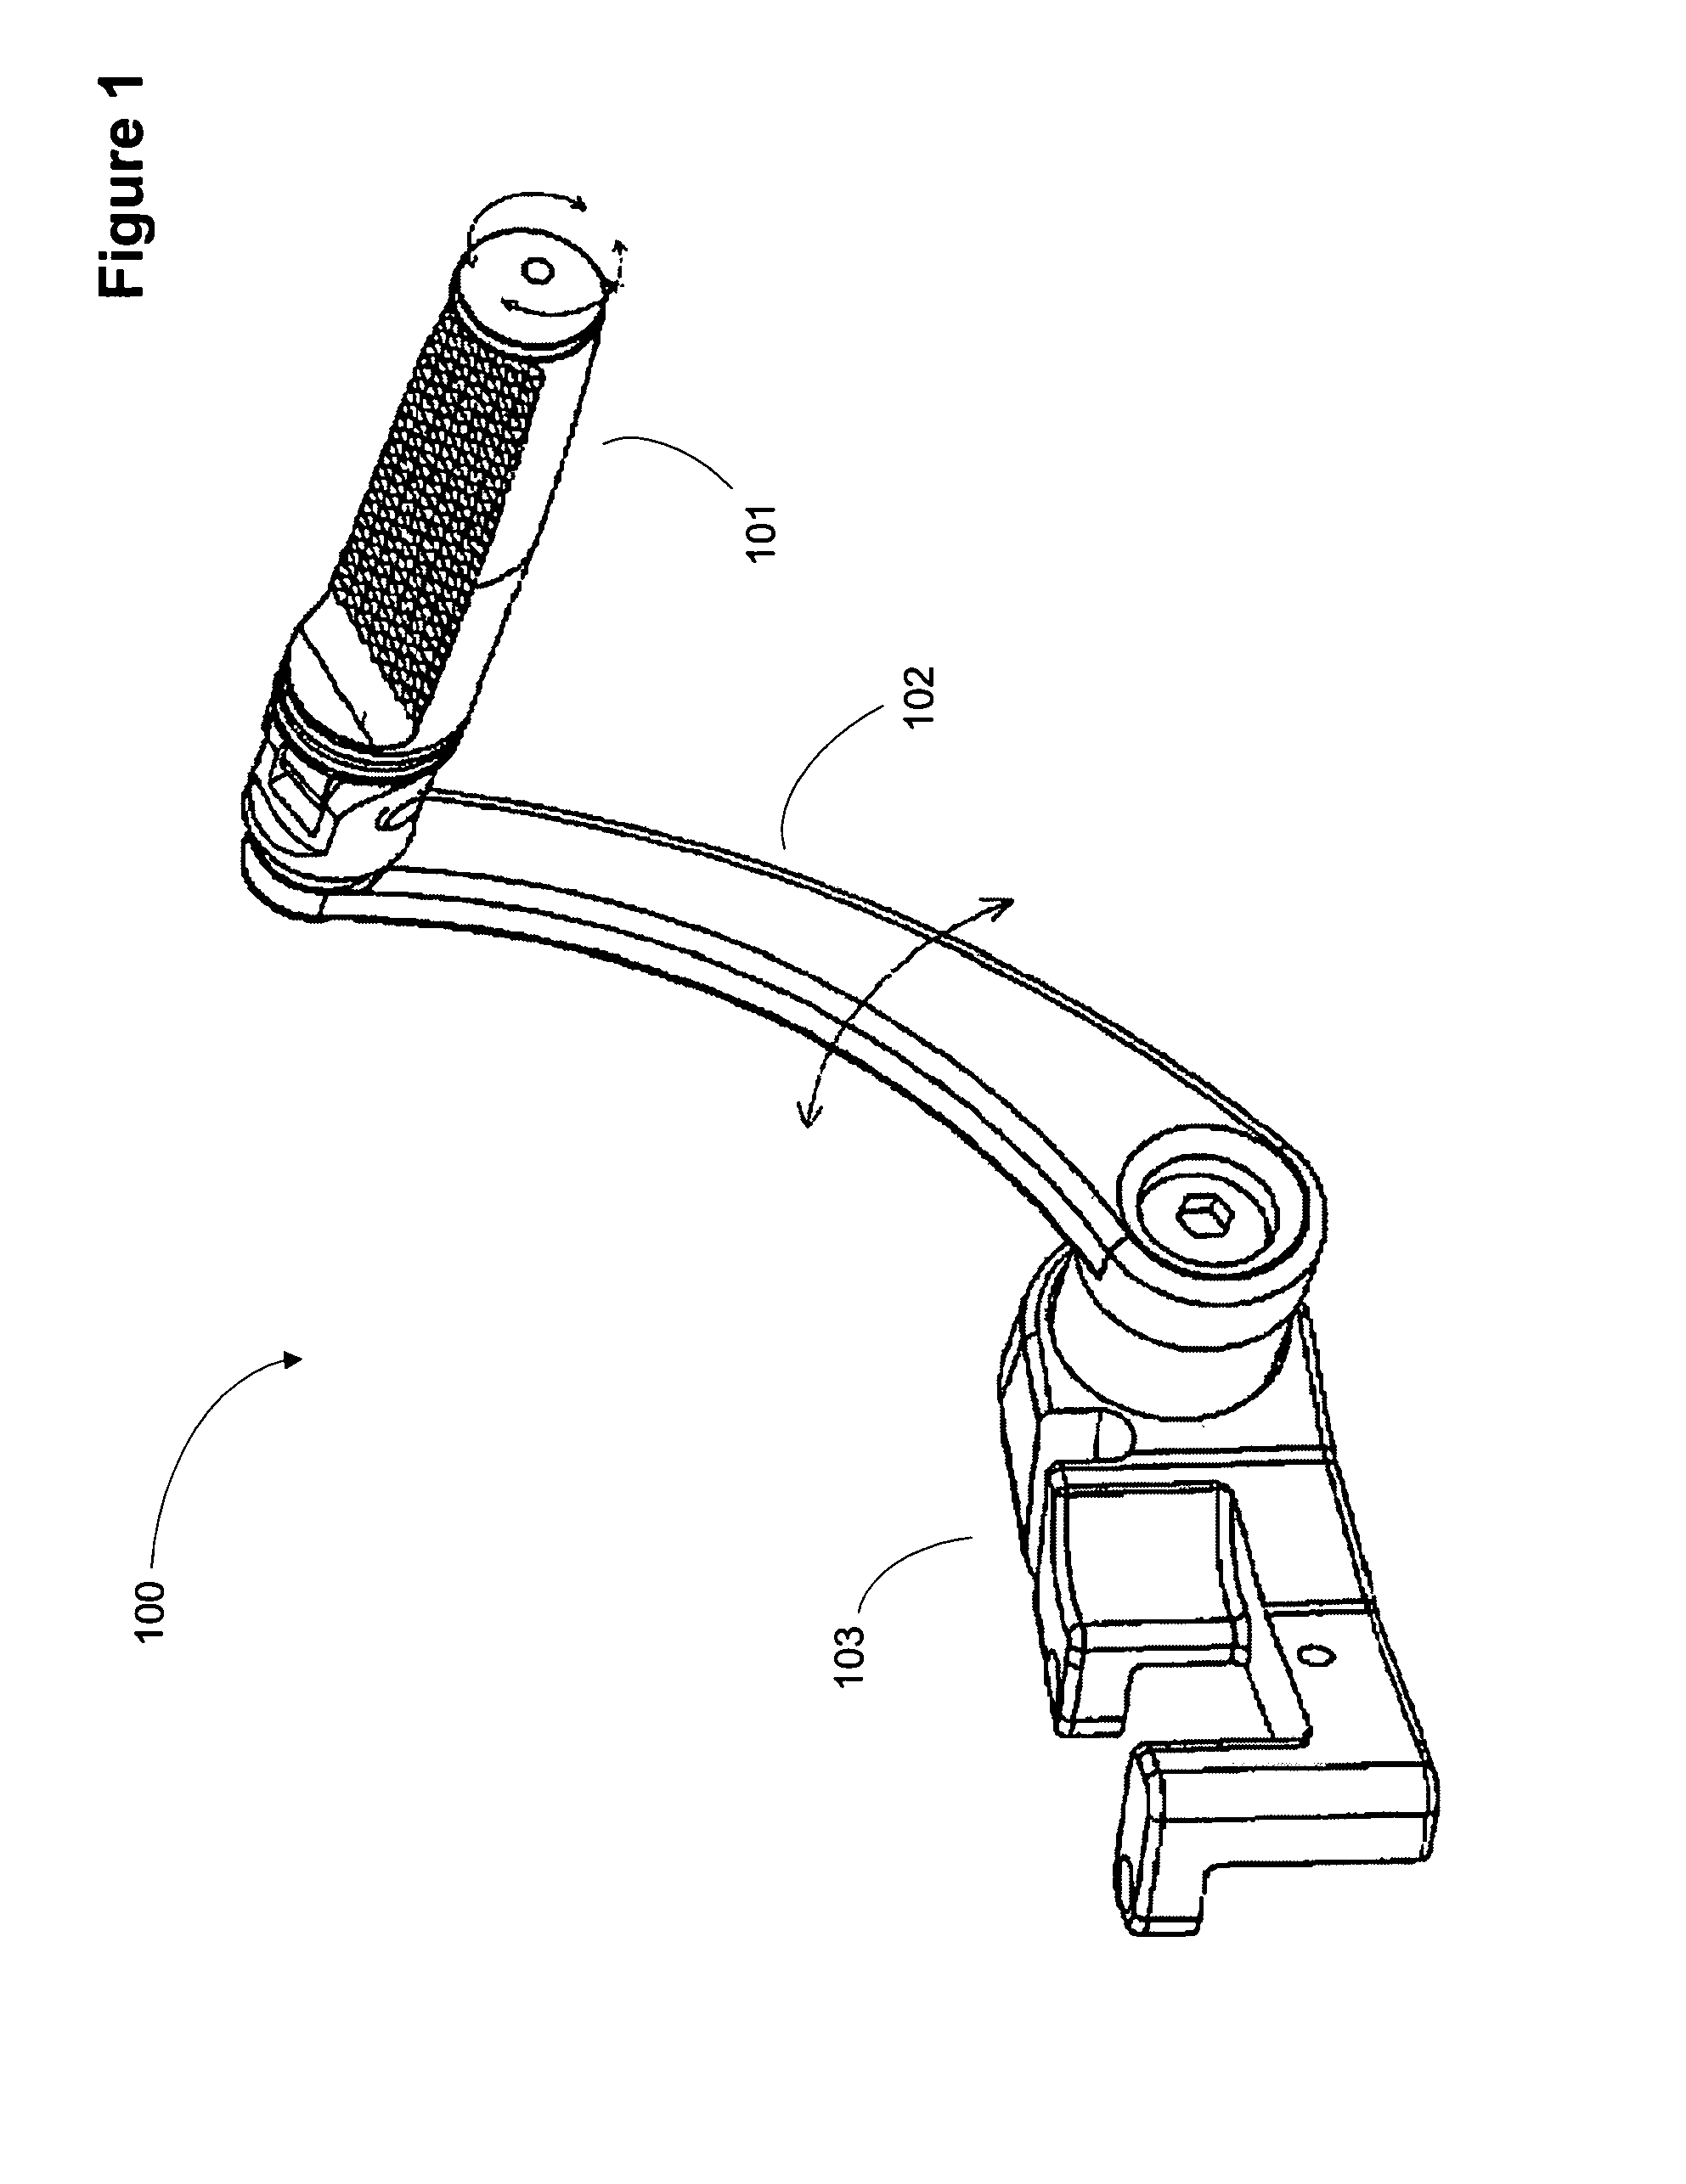 Floorboard mounted foot peg apparatus and method for a motorcycle